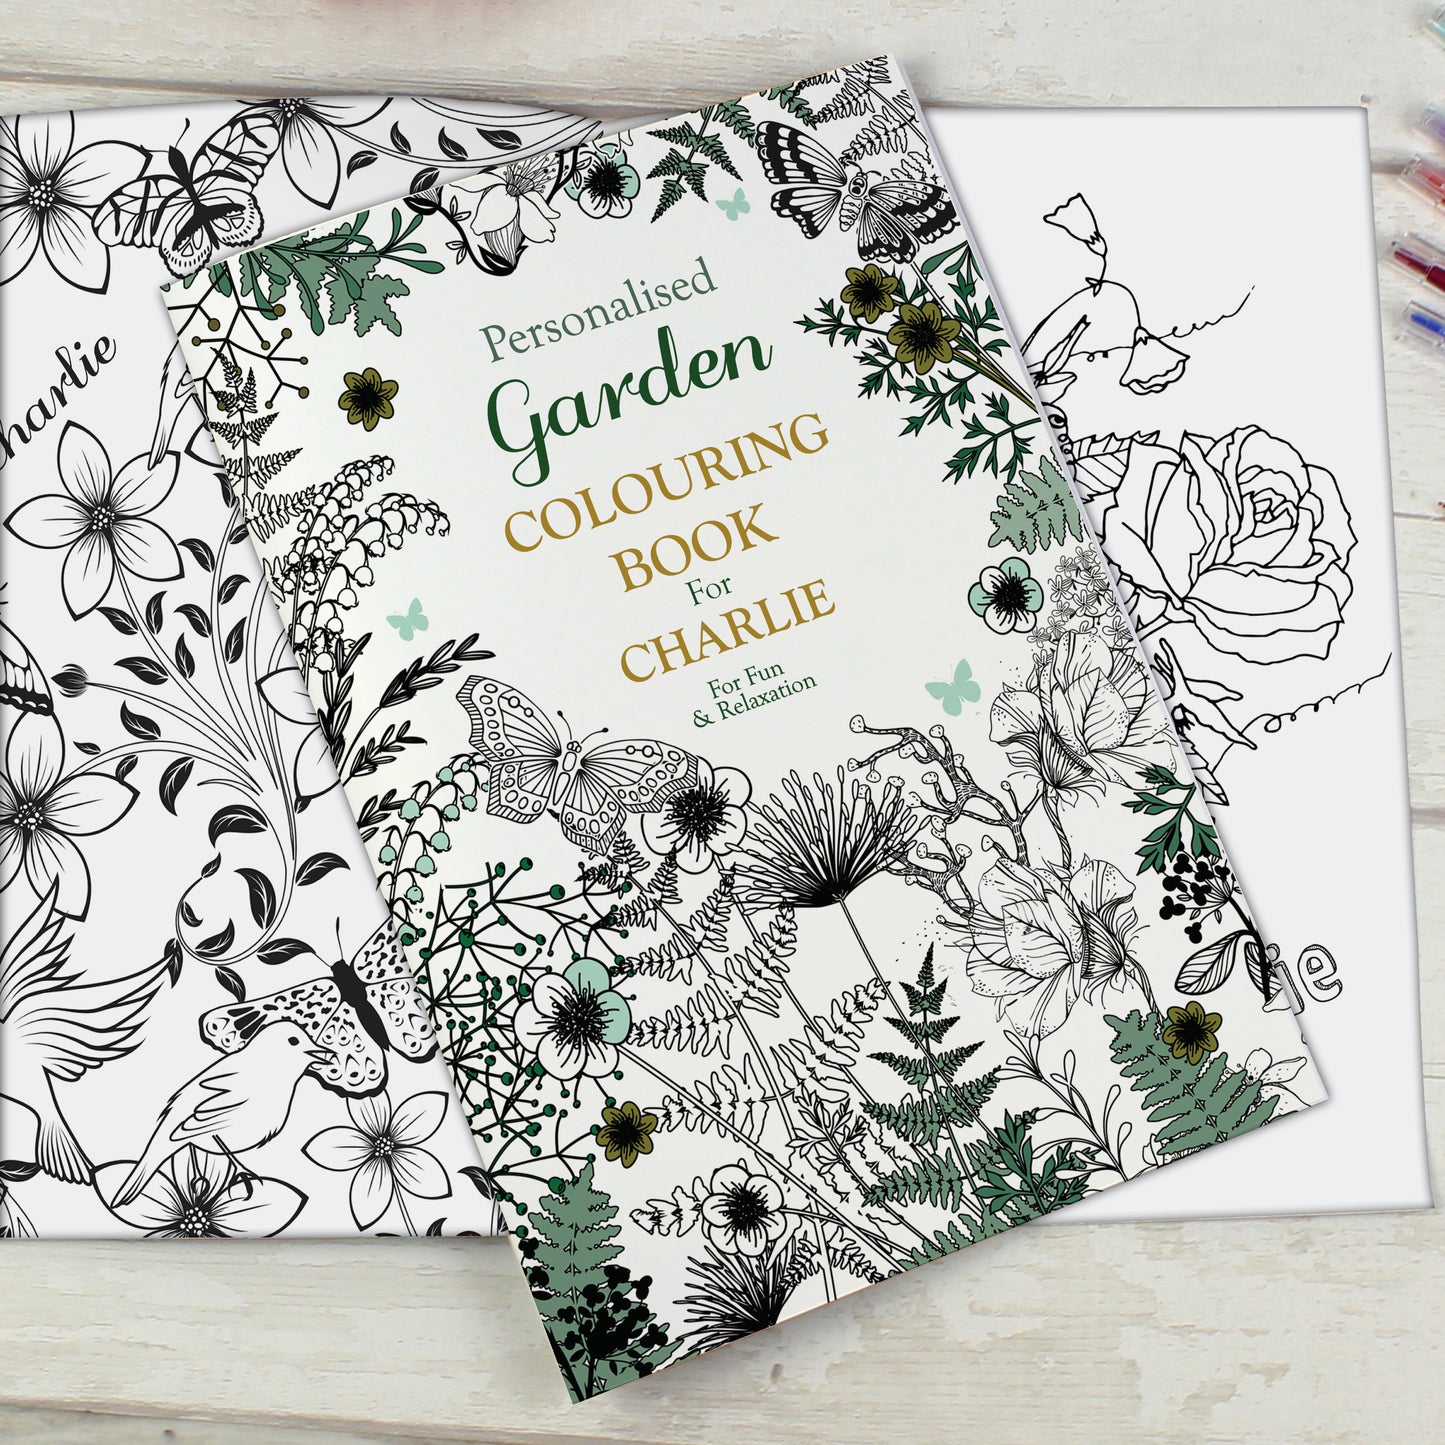 Personalised Gardening Colouring Book - Personalise It!